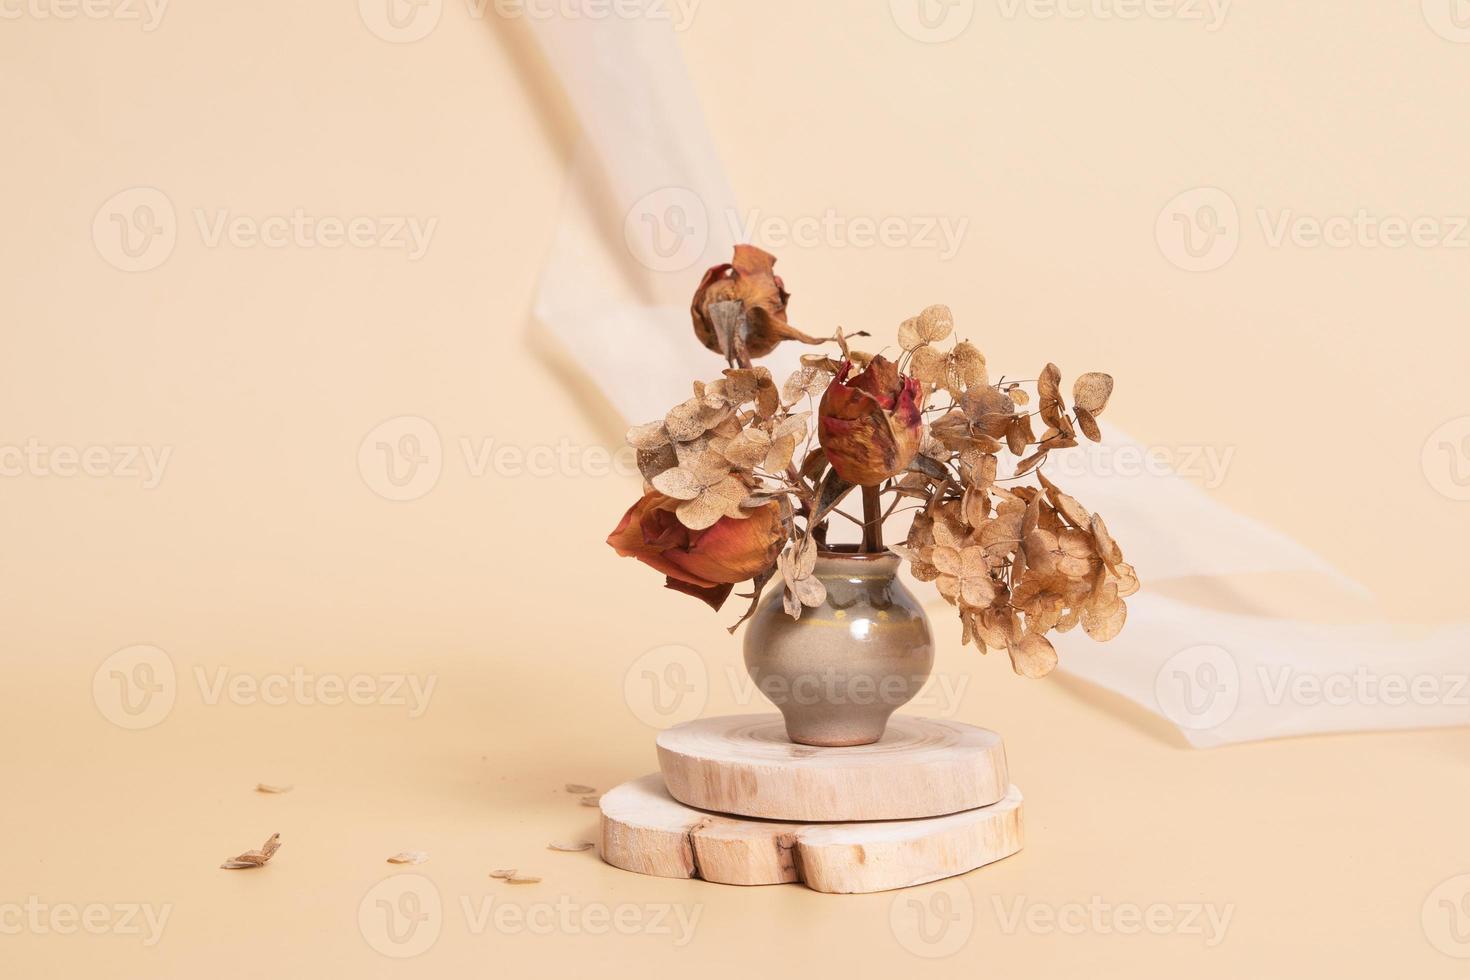 Miniature vase with dried flowers on wooden podiums. Still life monochrome minimalist neutral color concept. photo